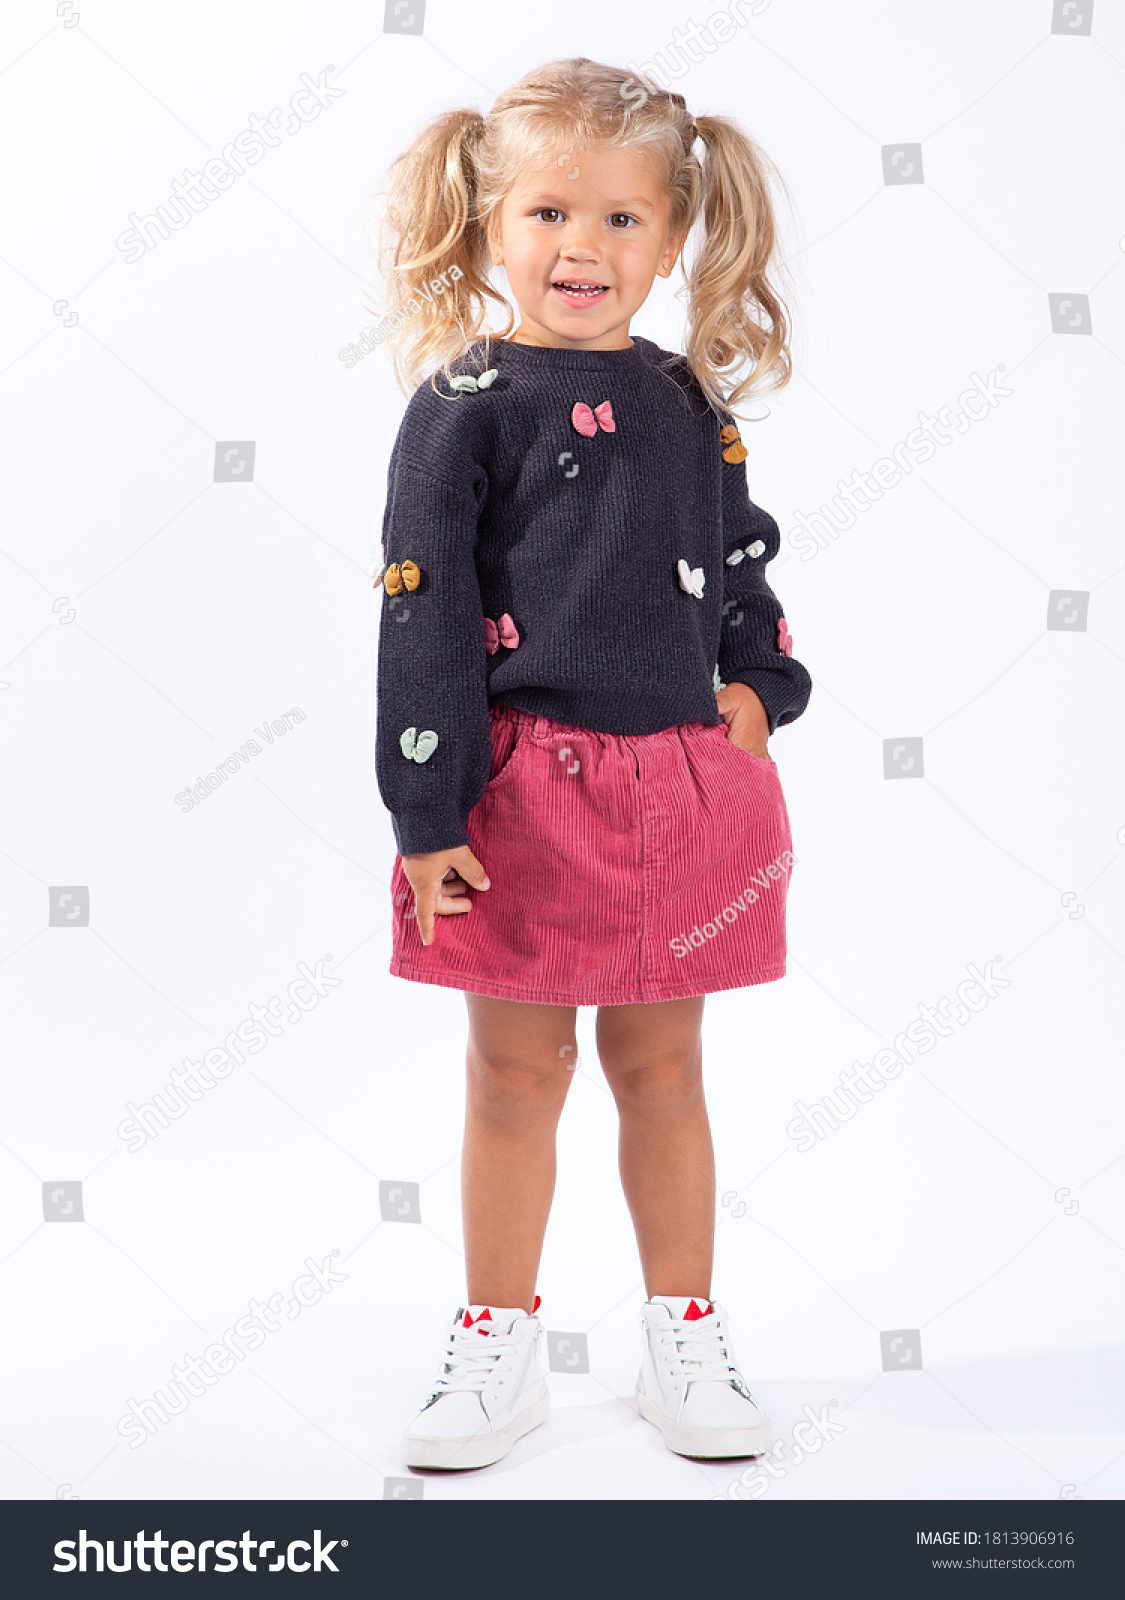 Cute beautiful European blonde girl with two ponytails stands on a white background in full growth. A 3-year-old girl is a model, posing, smiling. #1813906916